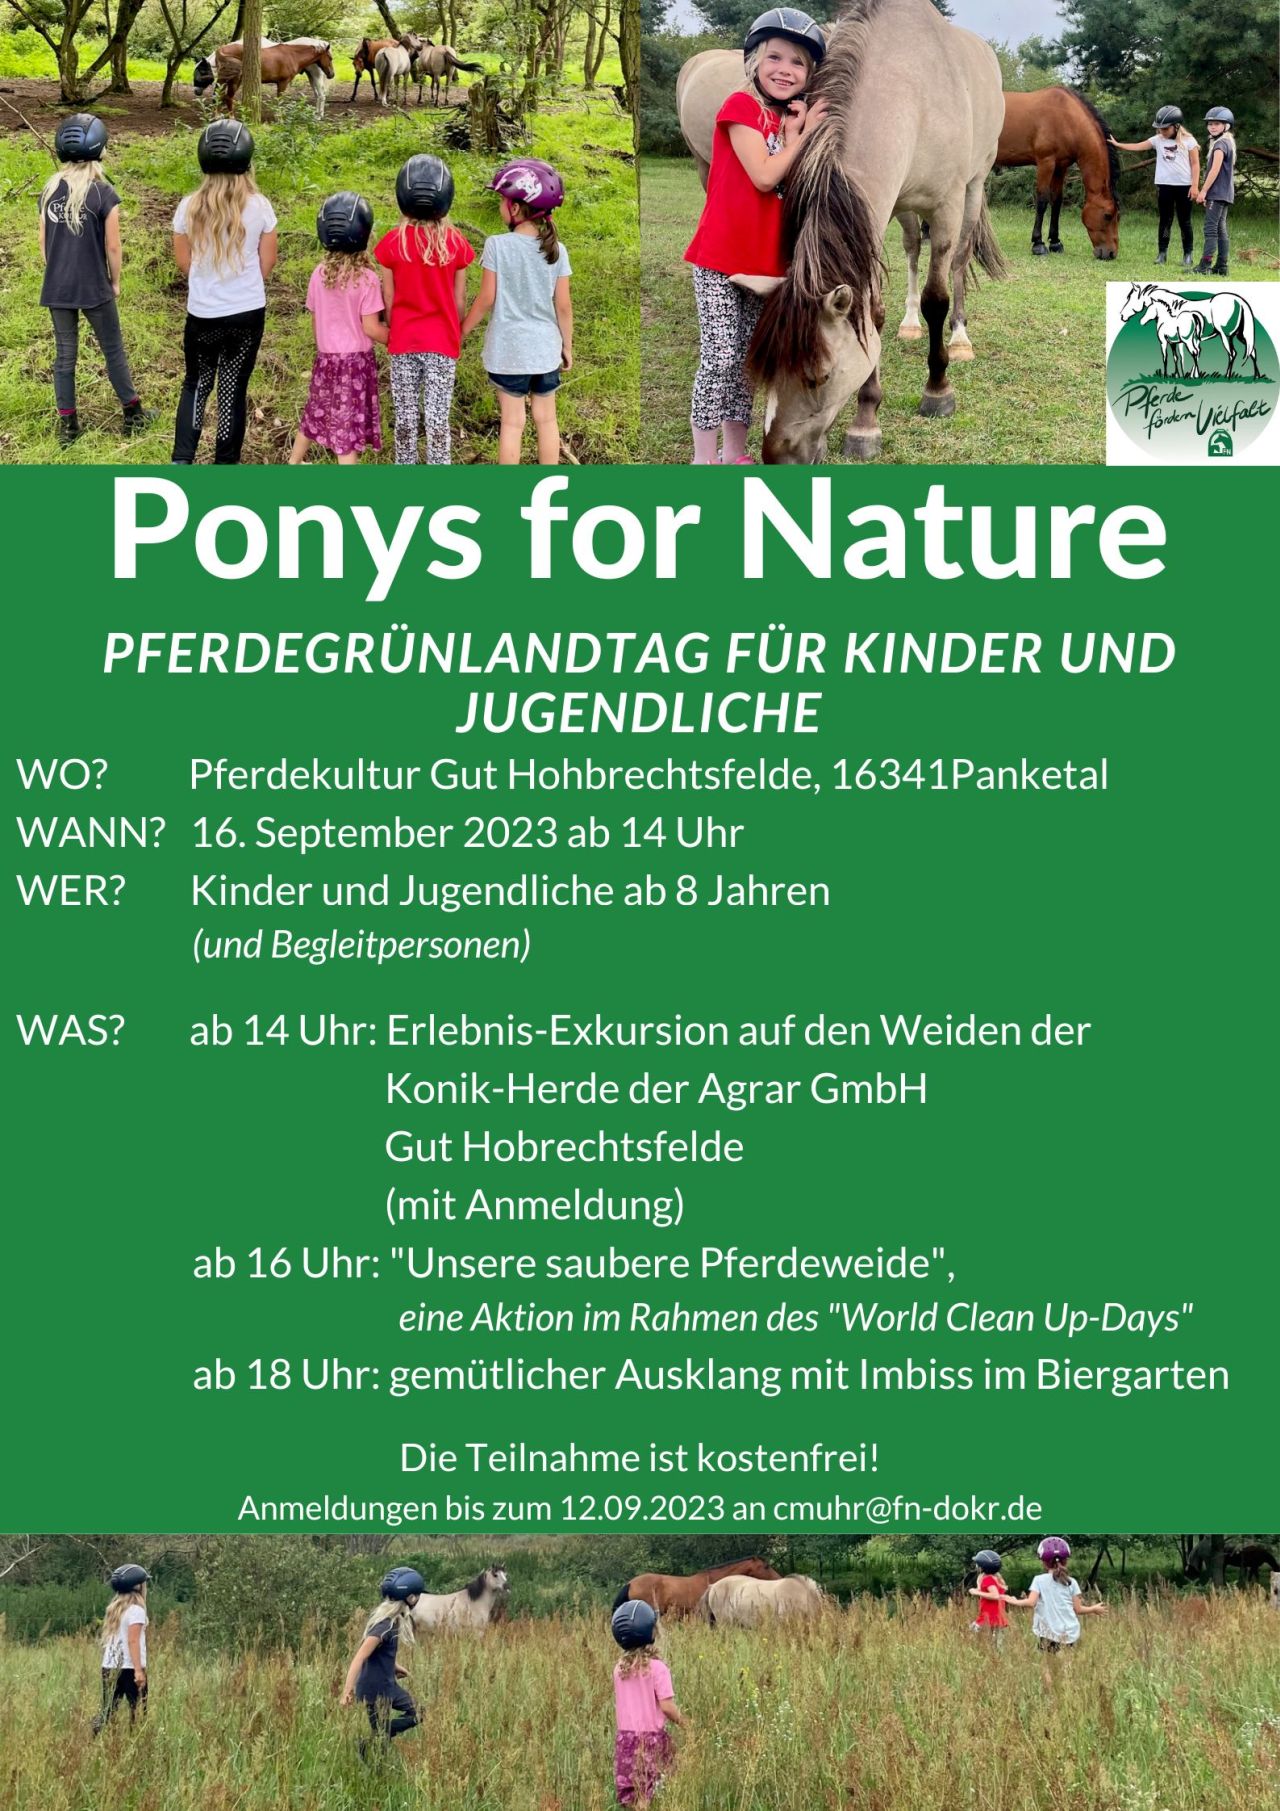 Ponys for Nature (Berlin)